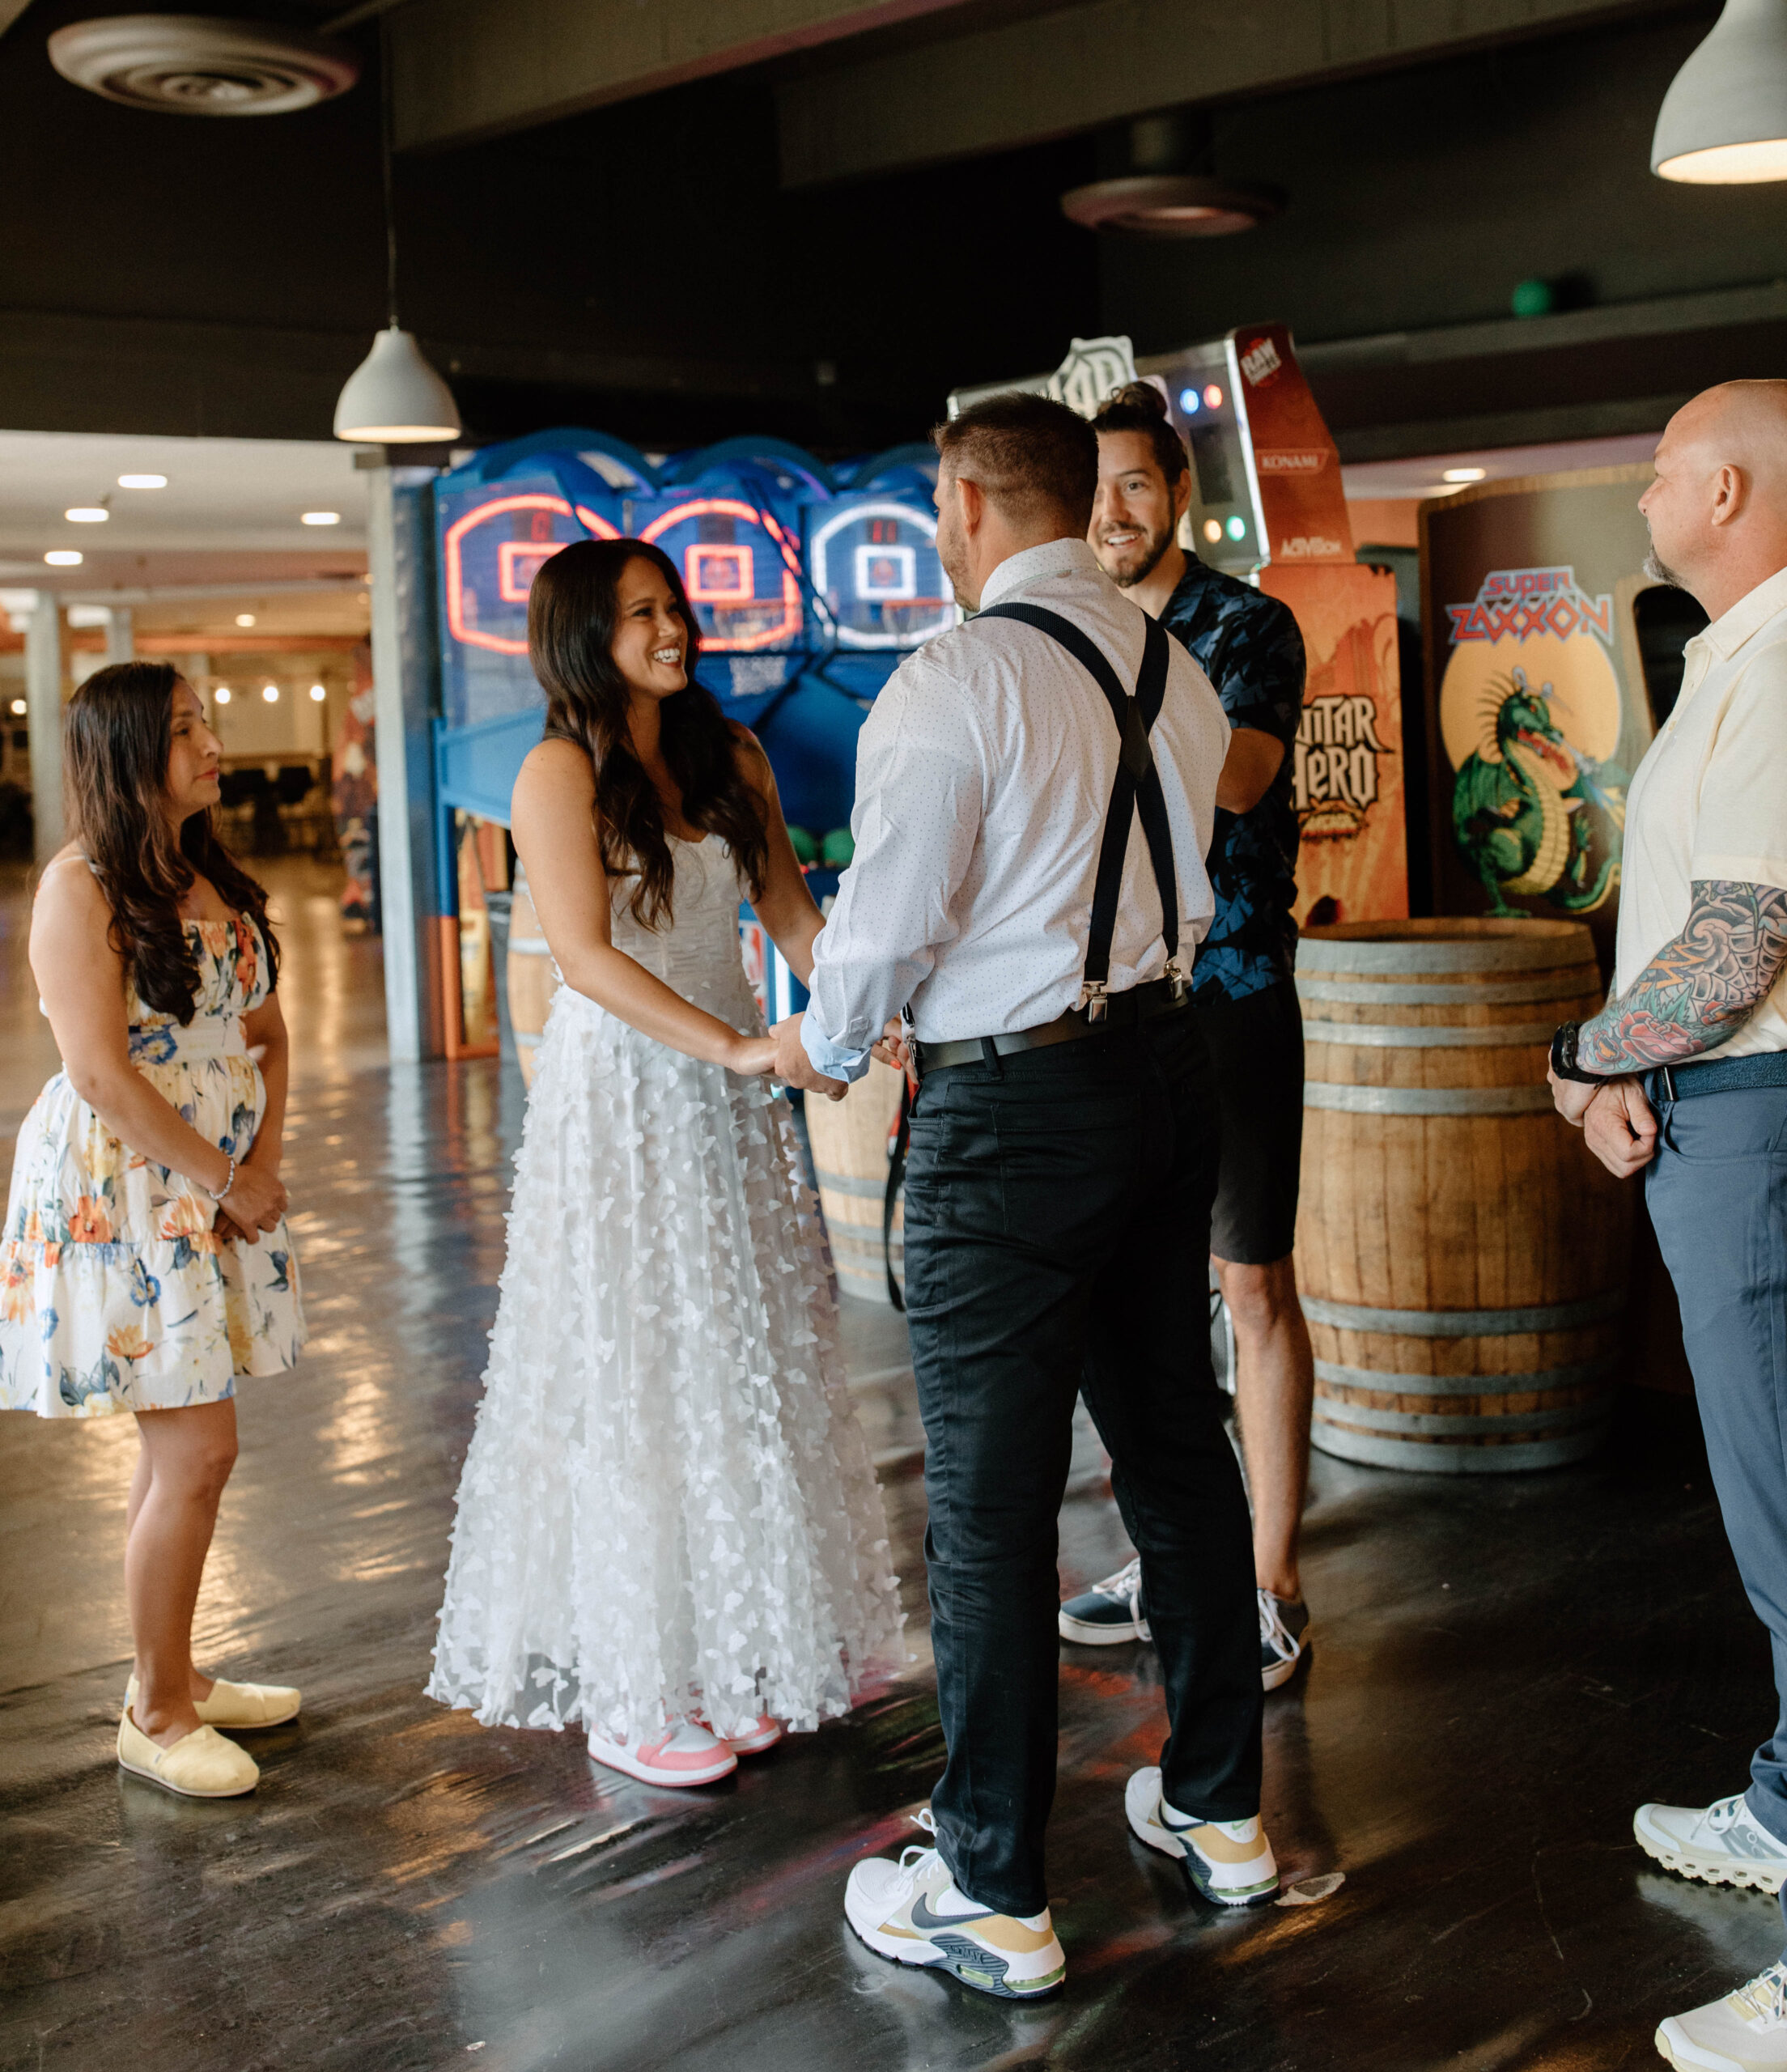 Wedding Ceremony at Cidercade - An Arcade Elopement Photography. 